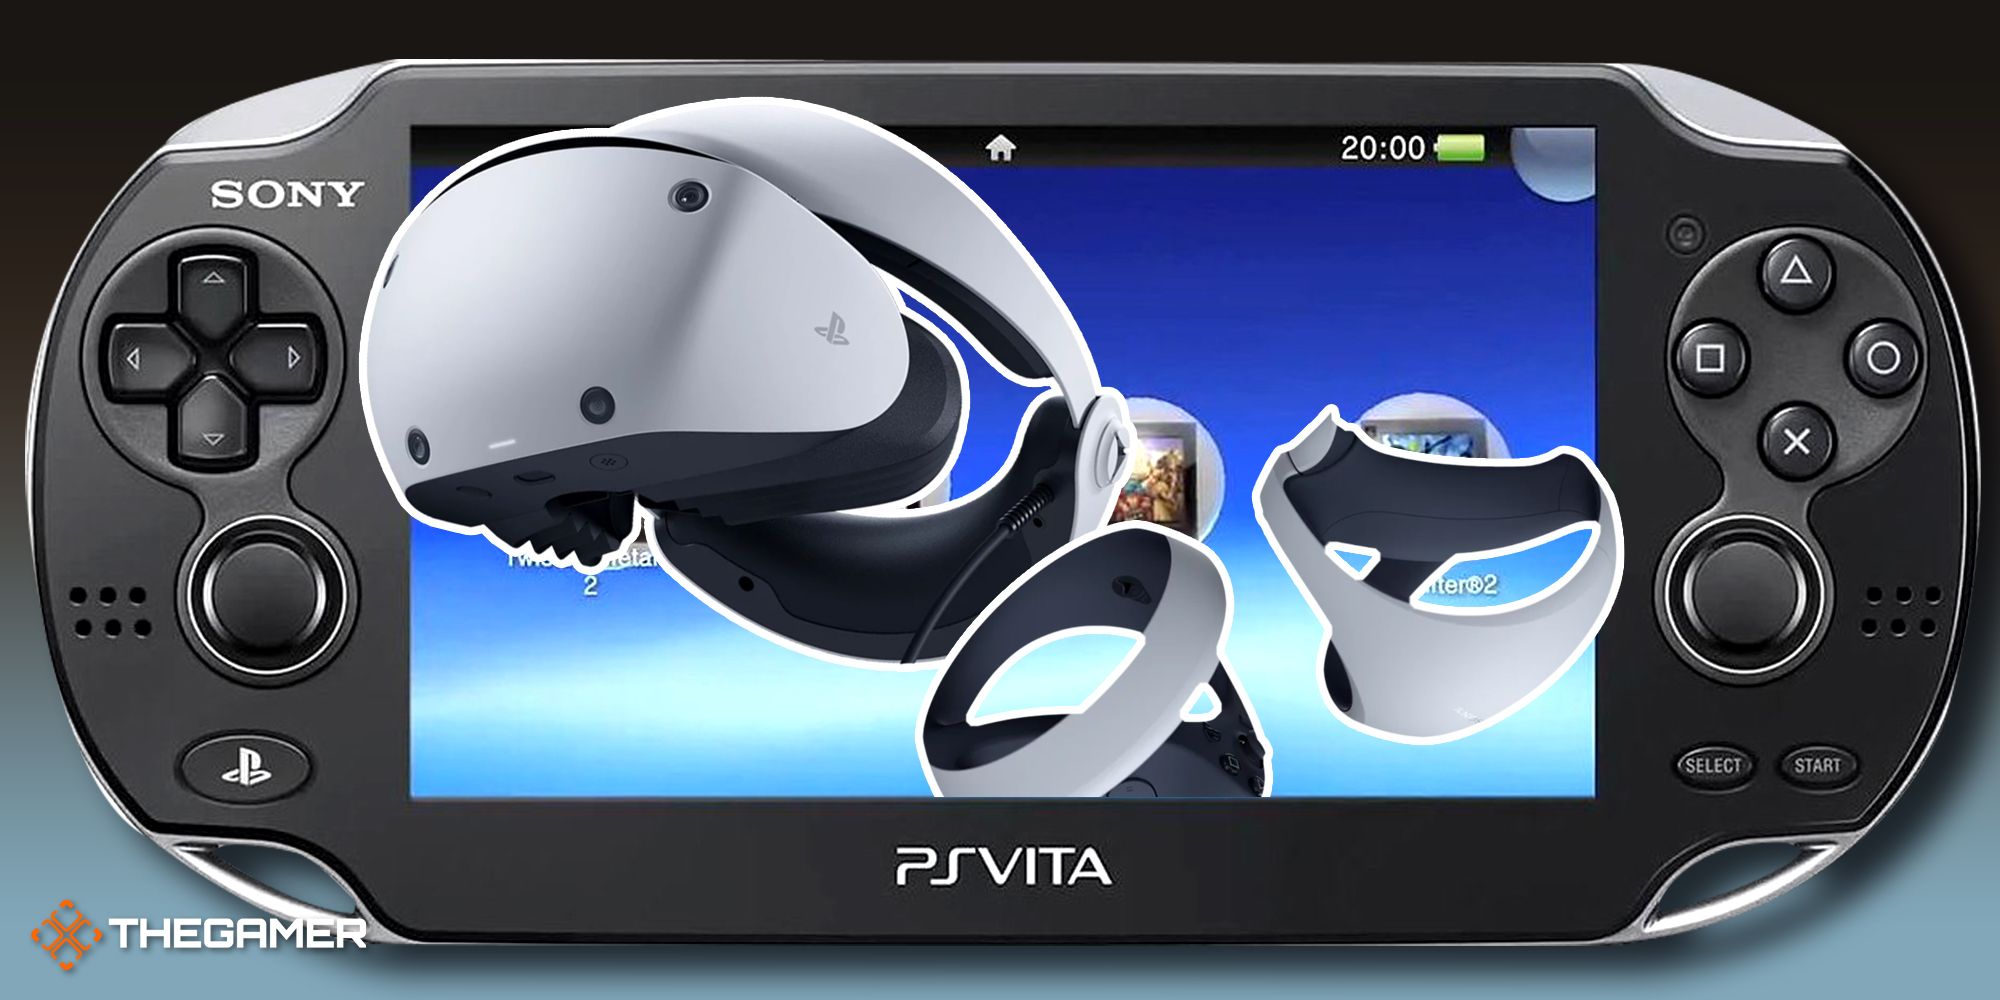 Every PS3, Vita, and PSP game on the PlayStation Store, recorded